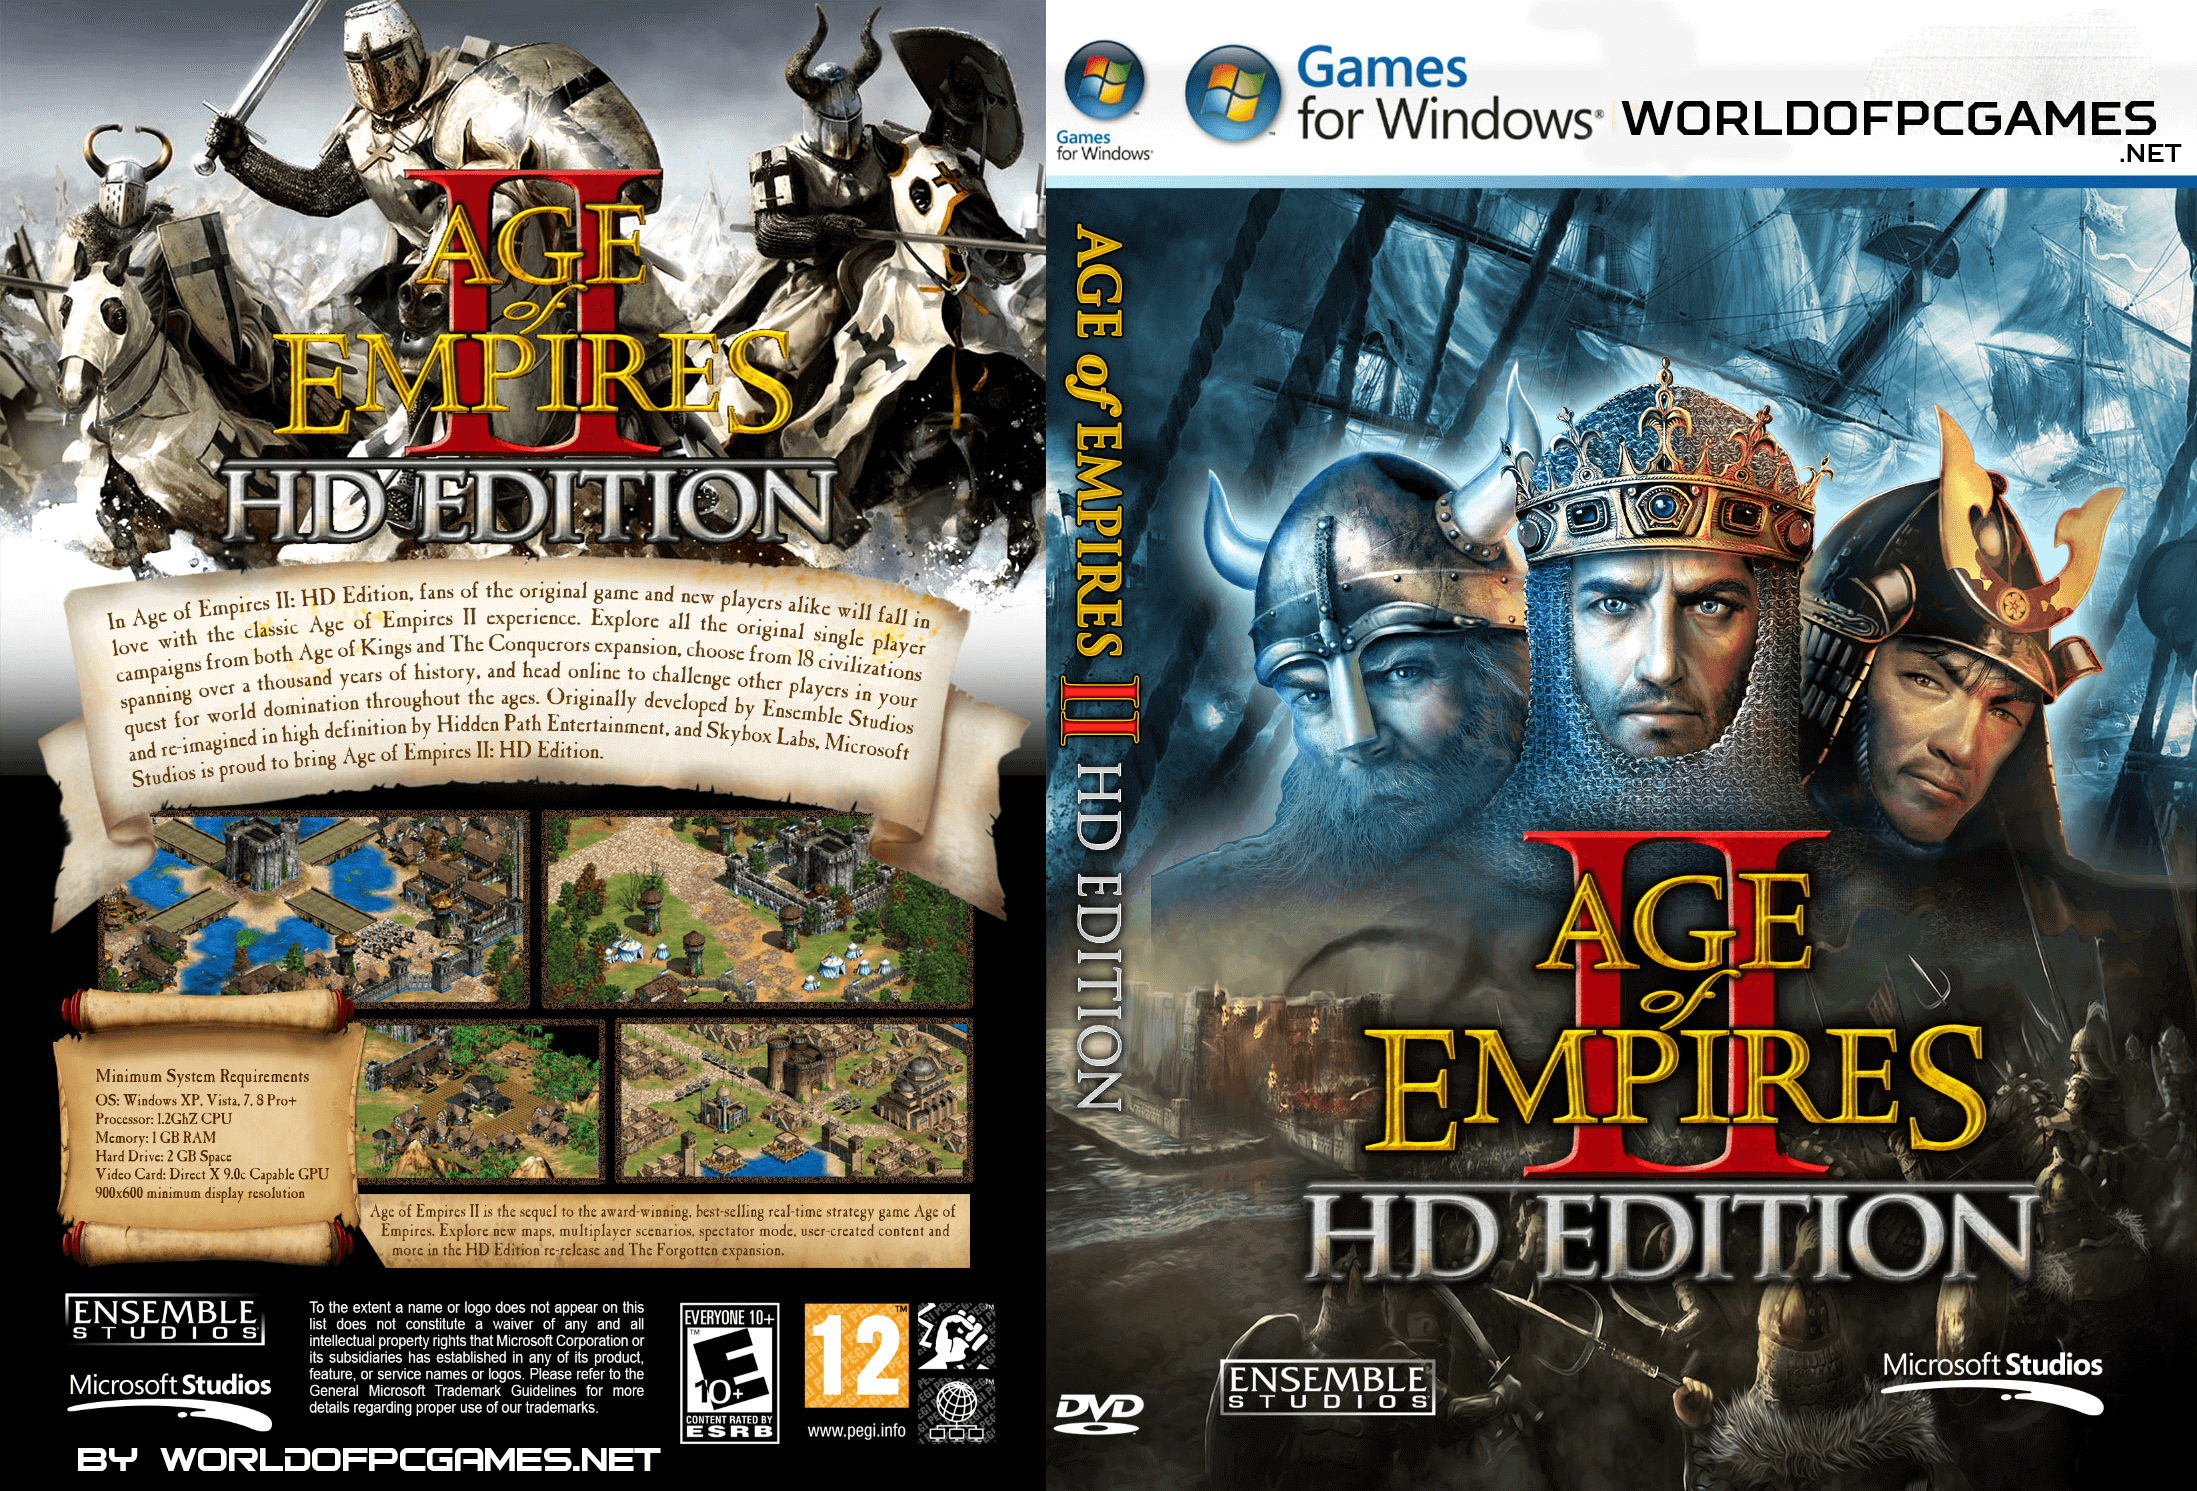 age of empires 2 free download full game